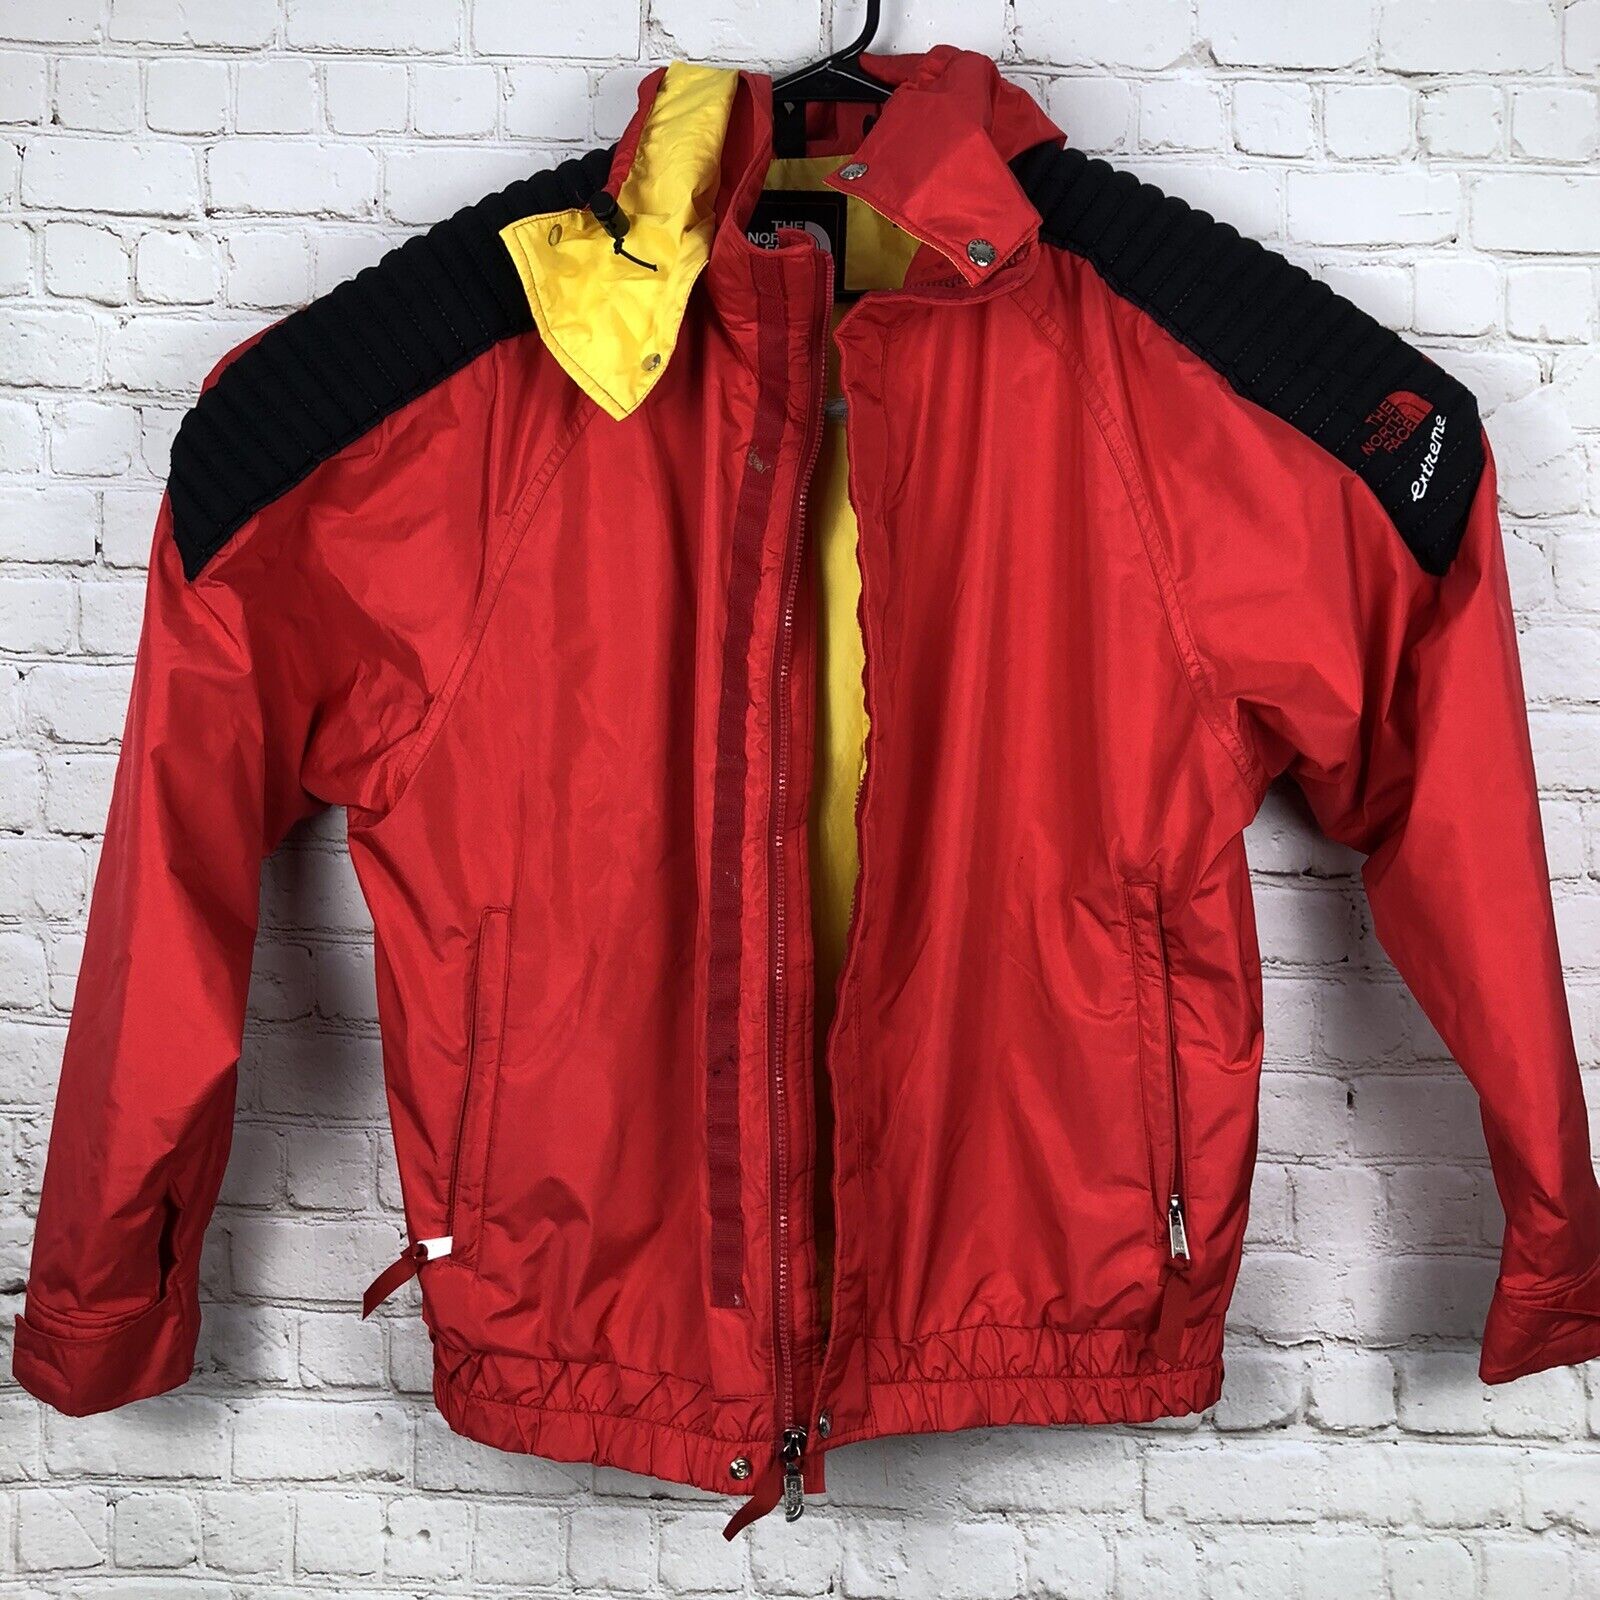 RARE Vintage 1990 North Face Extreme Gore Tex Hooded Red Jacket Large 90s